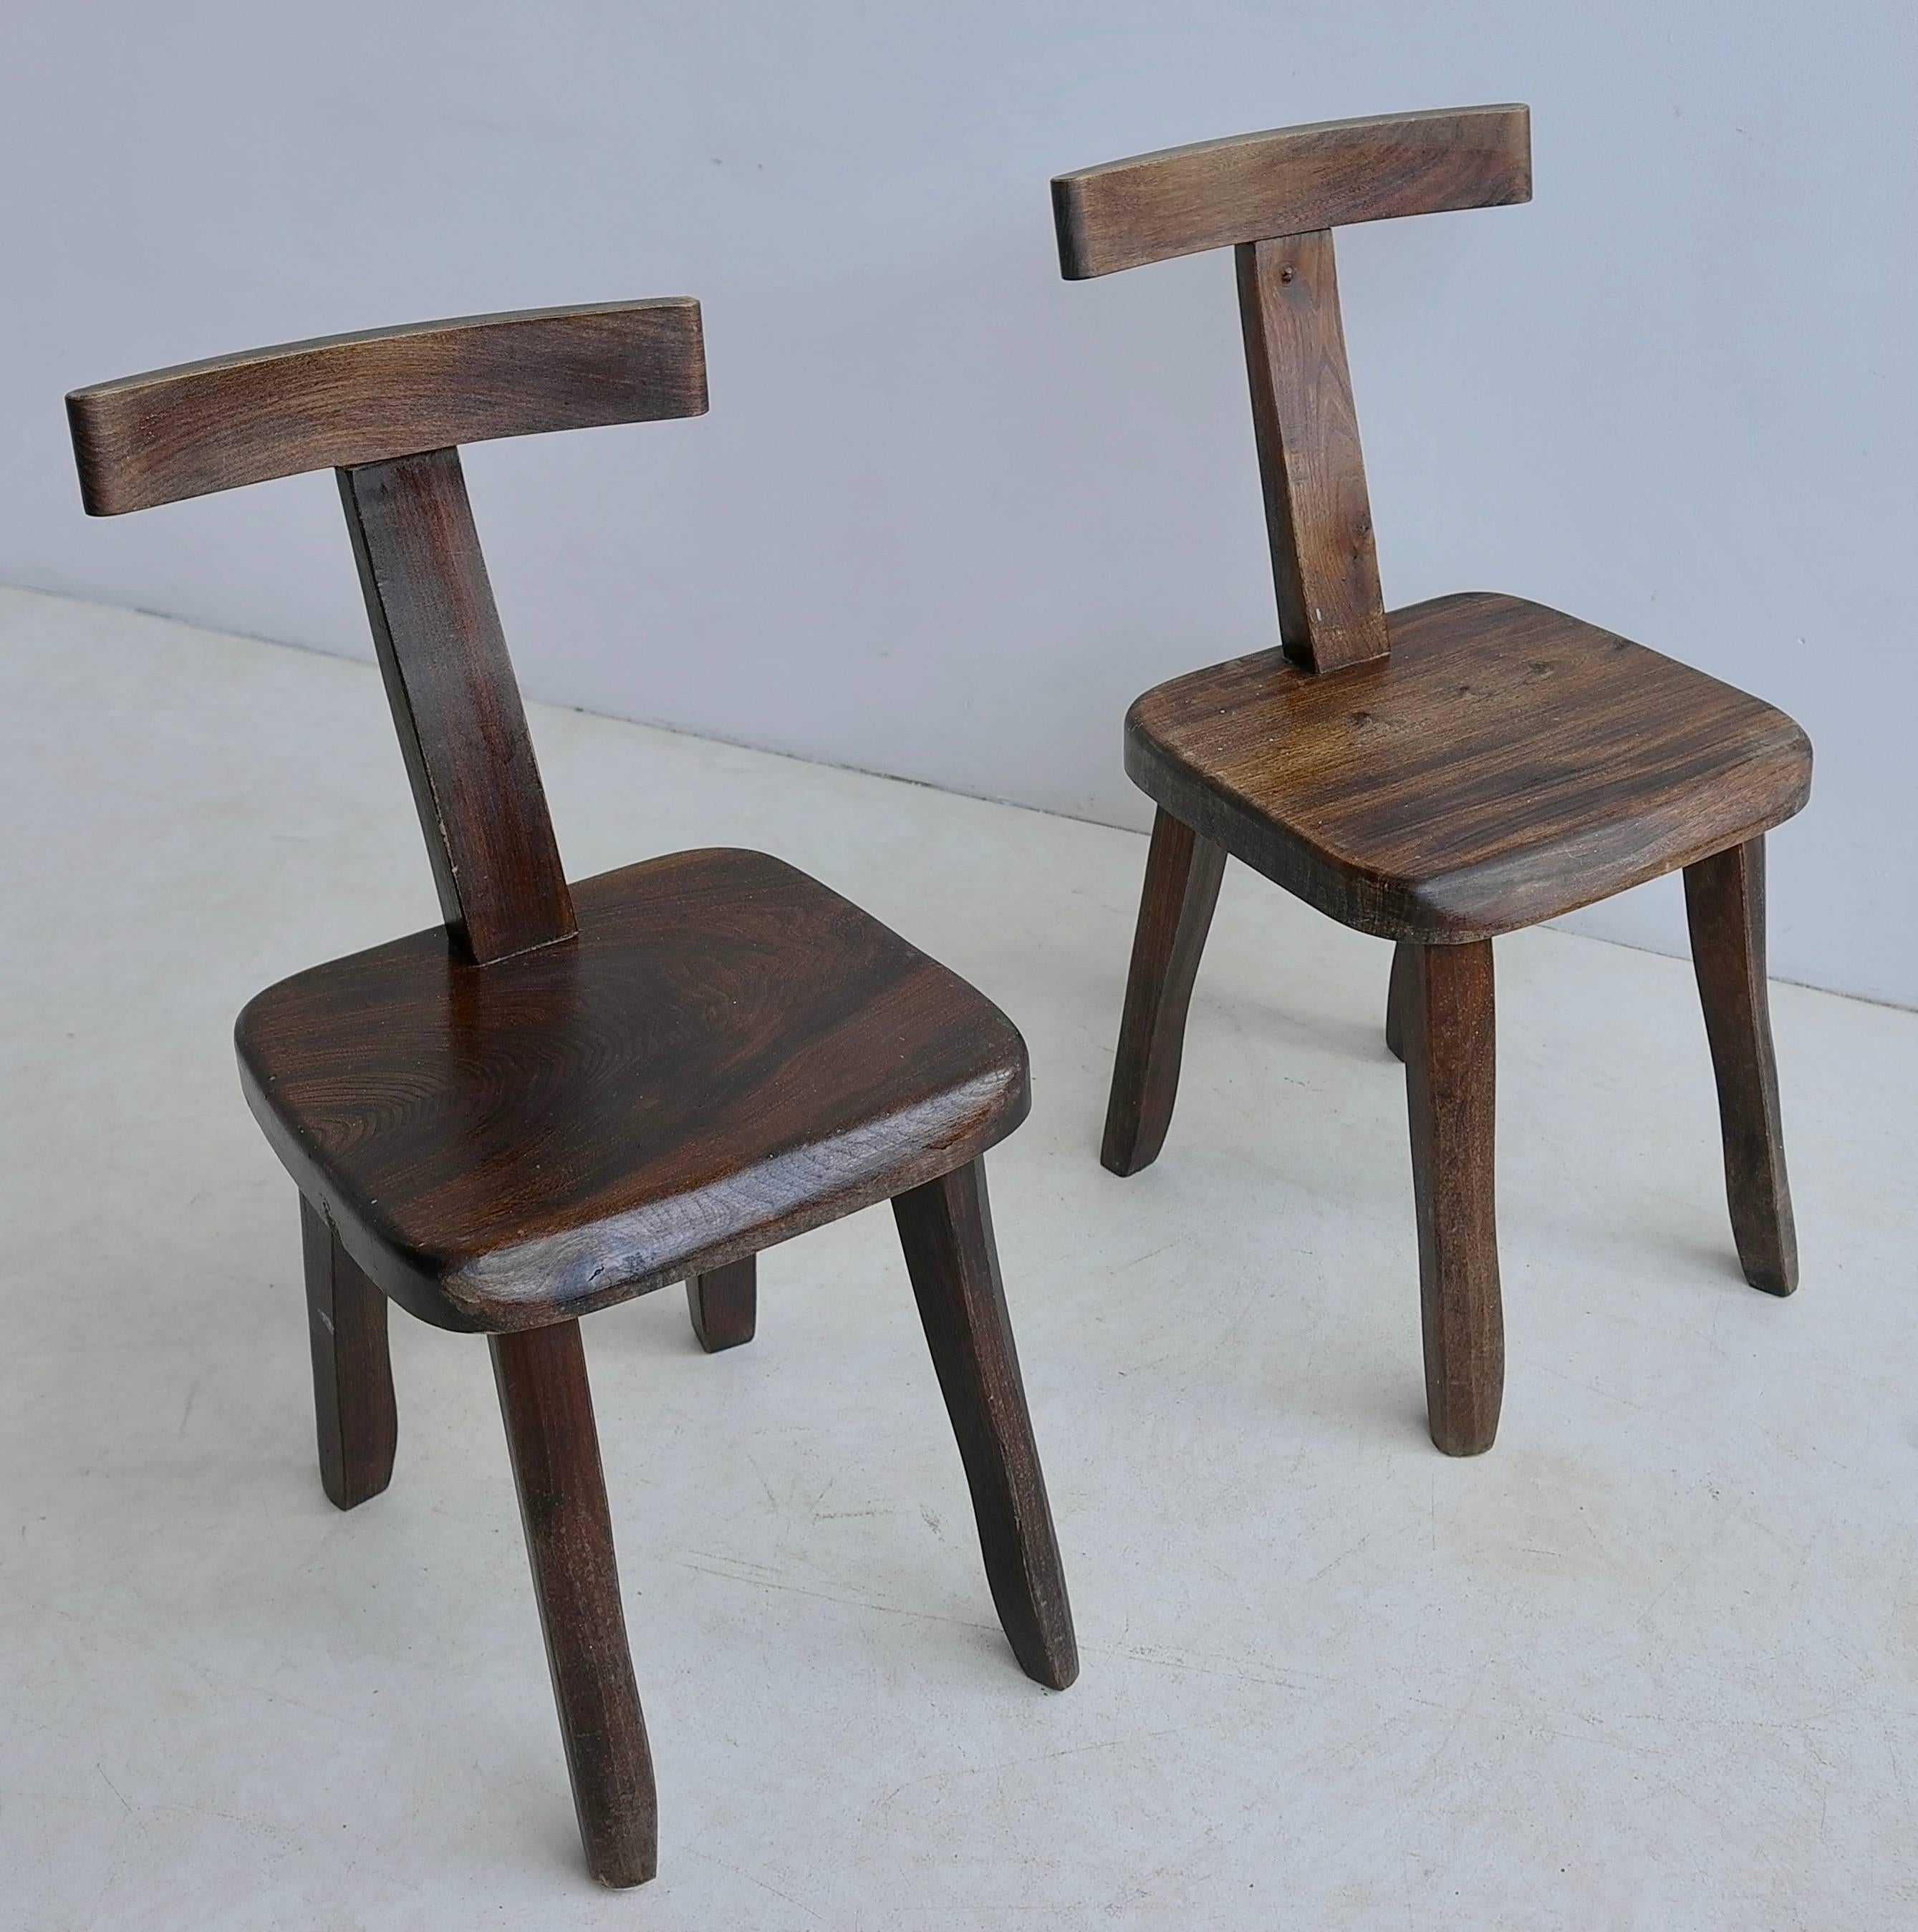 Mid-Century Modern Pair of Chairs by Olavi Hanninen for by Mikko Nupponen, Finland, 1950s